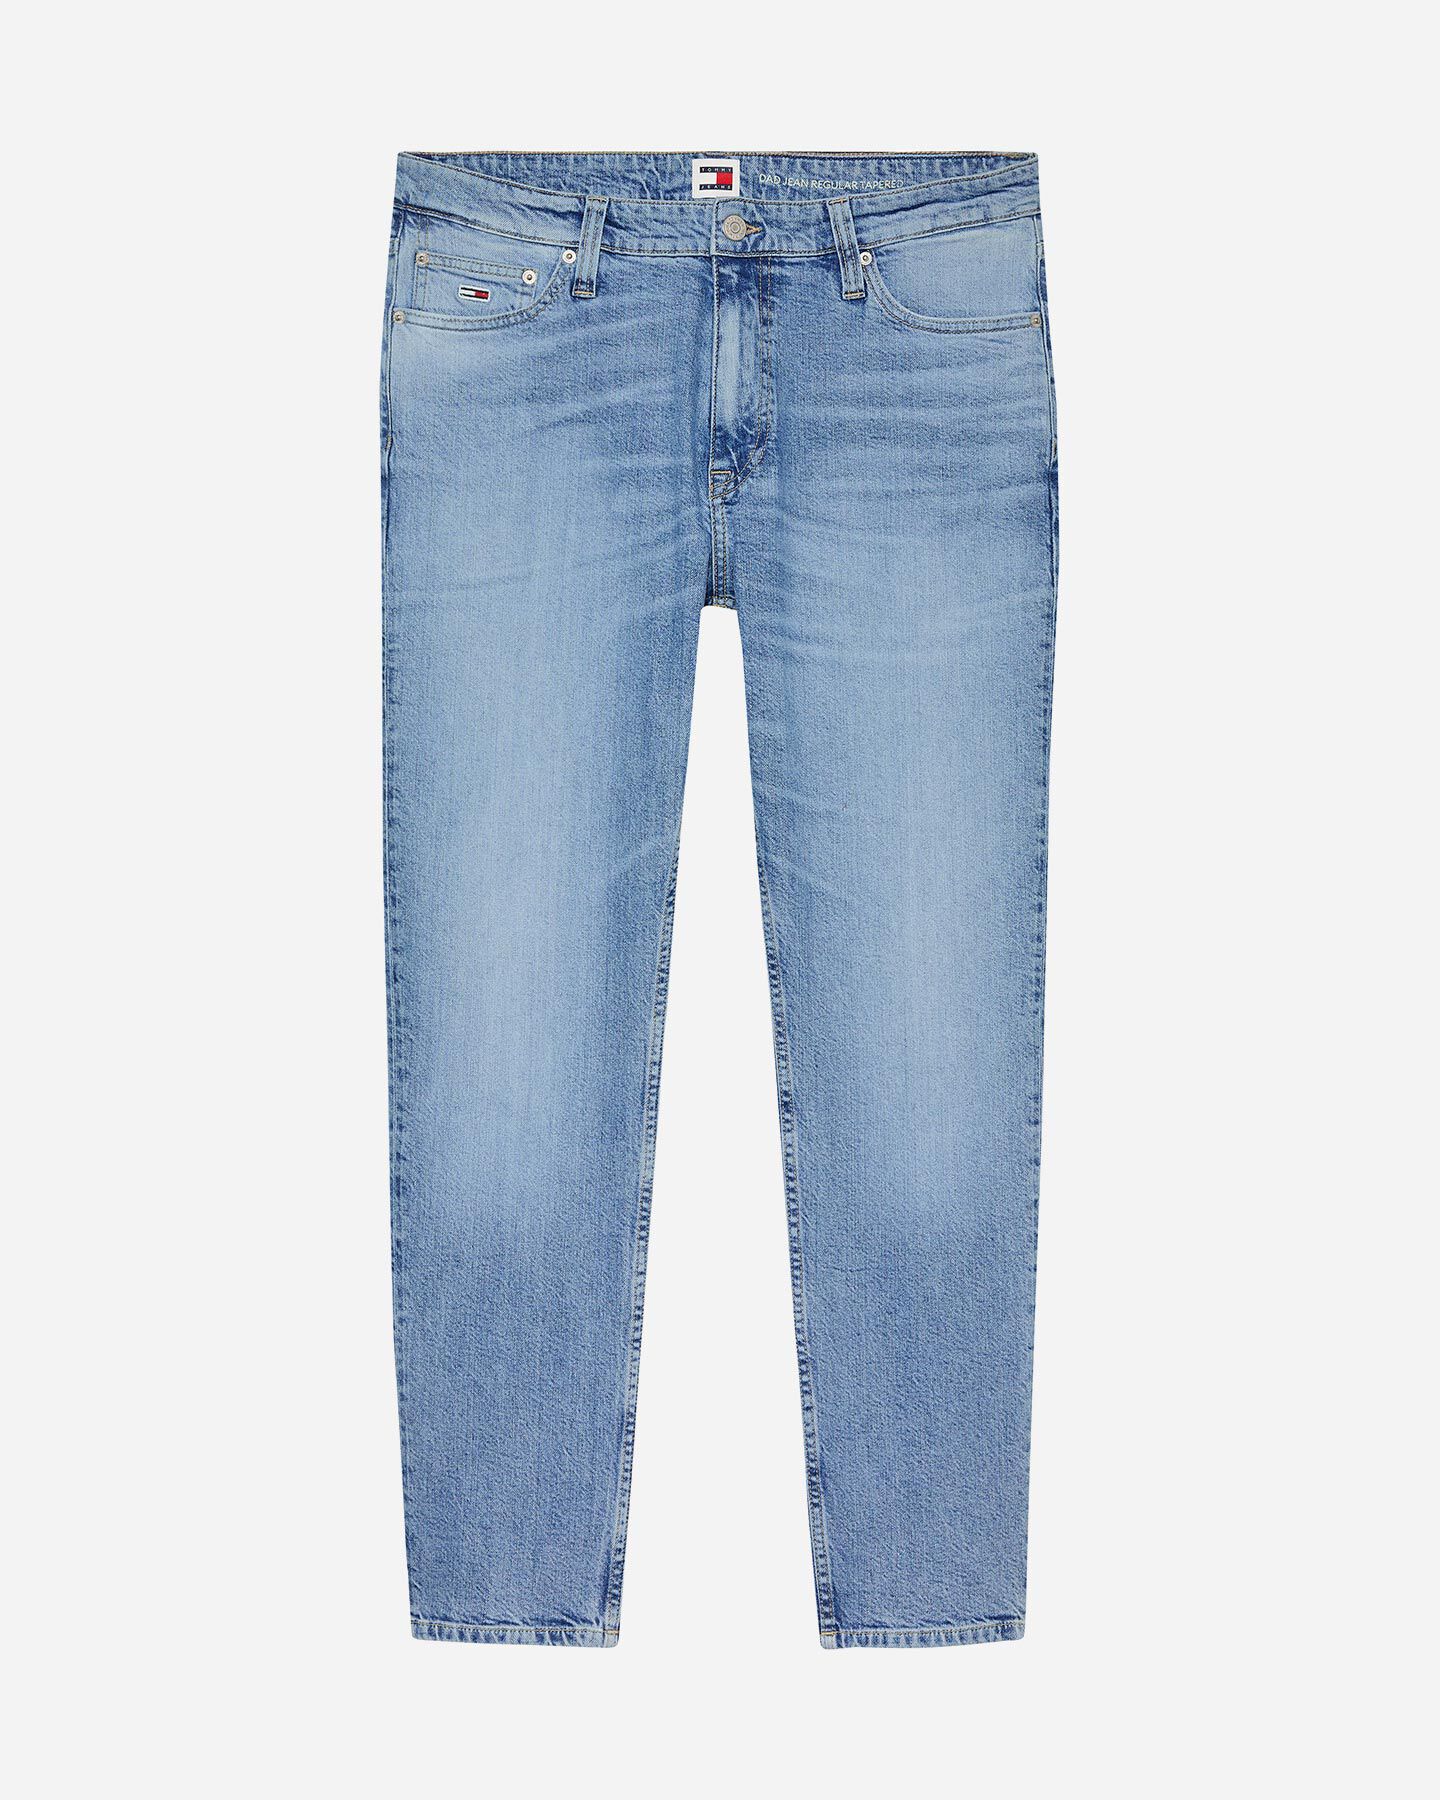  Jeans TOMMY HILFIGER DAD TAPERED M S5686197|UNI|32/32 scatto 0